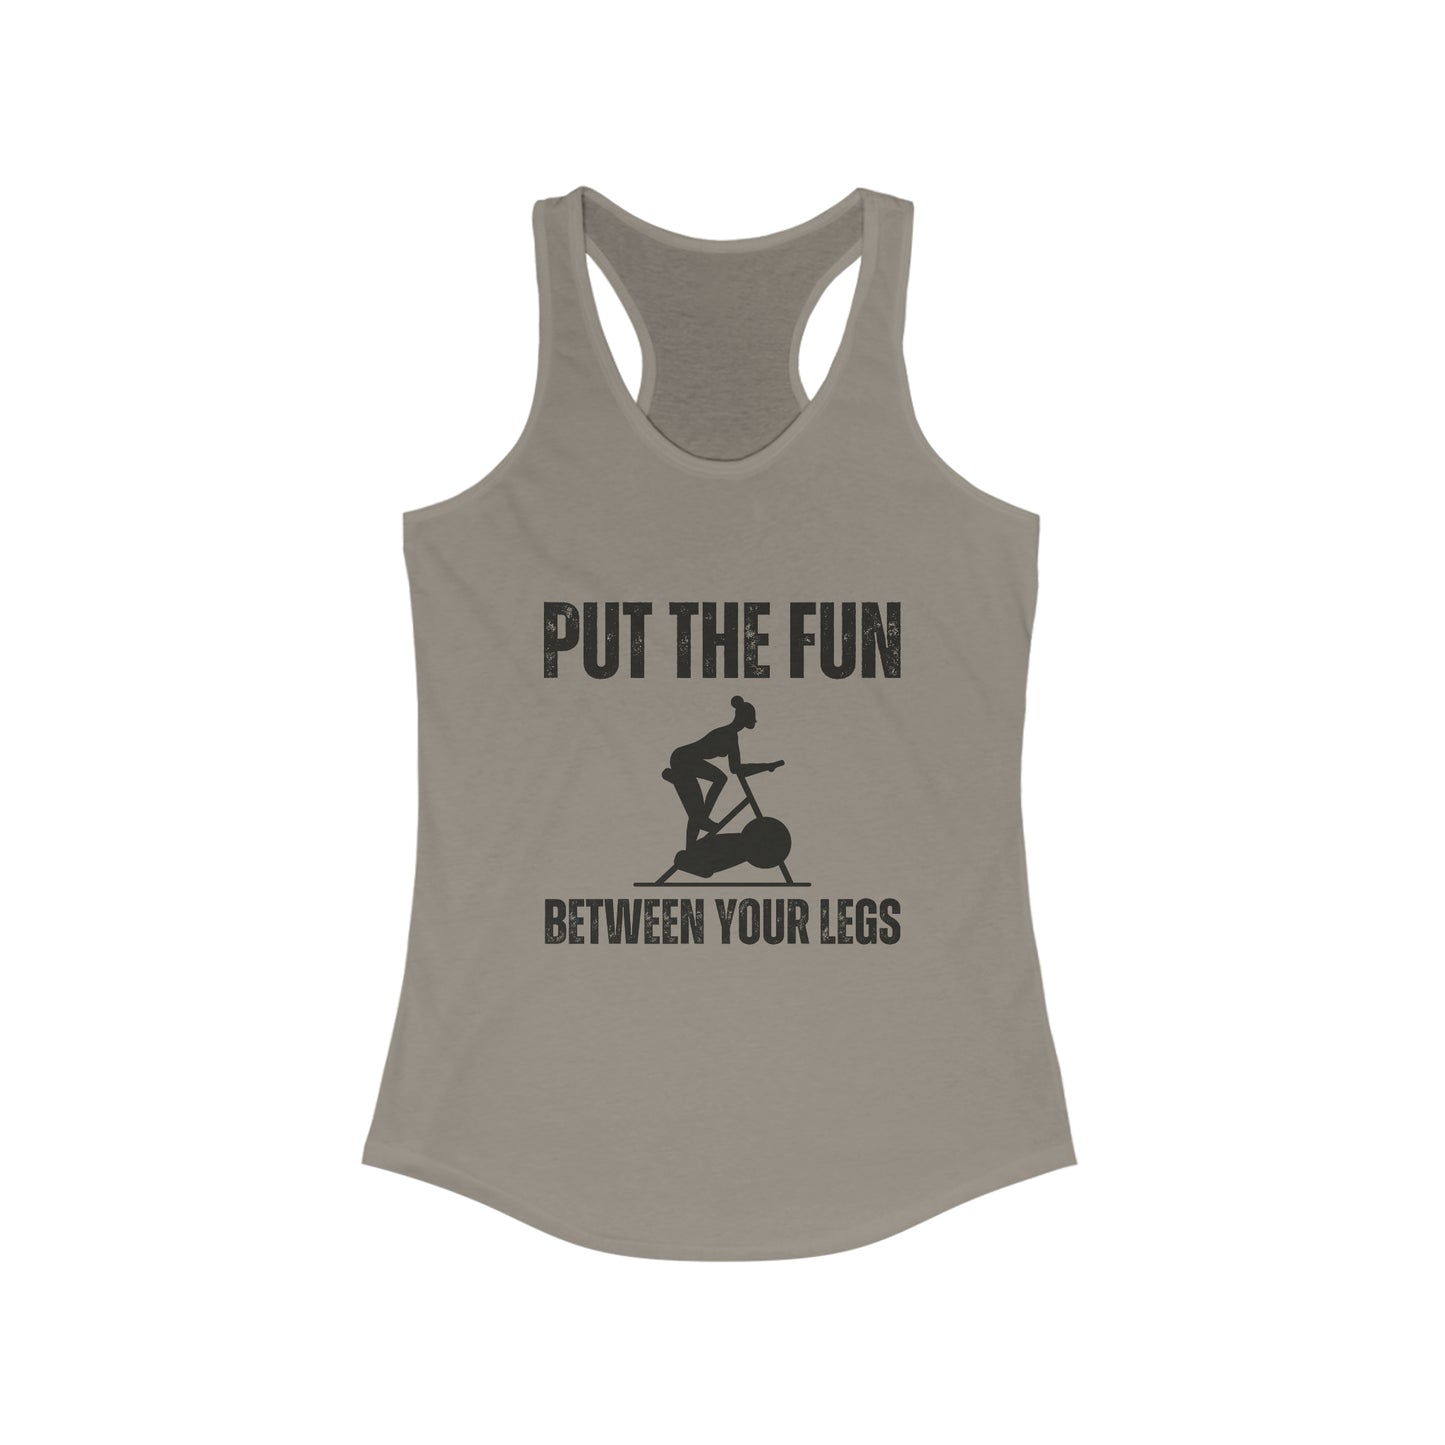 Funny cycling class top